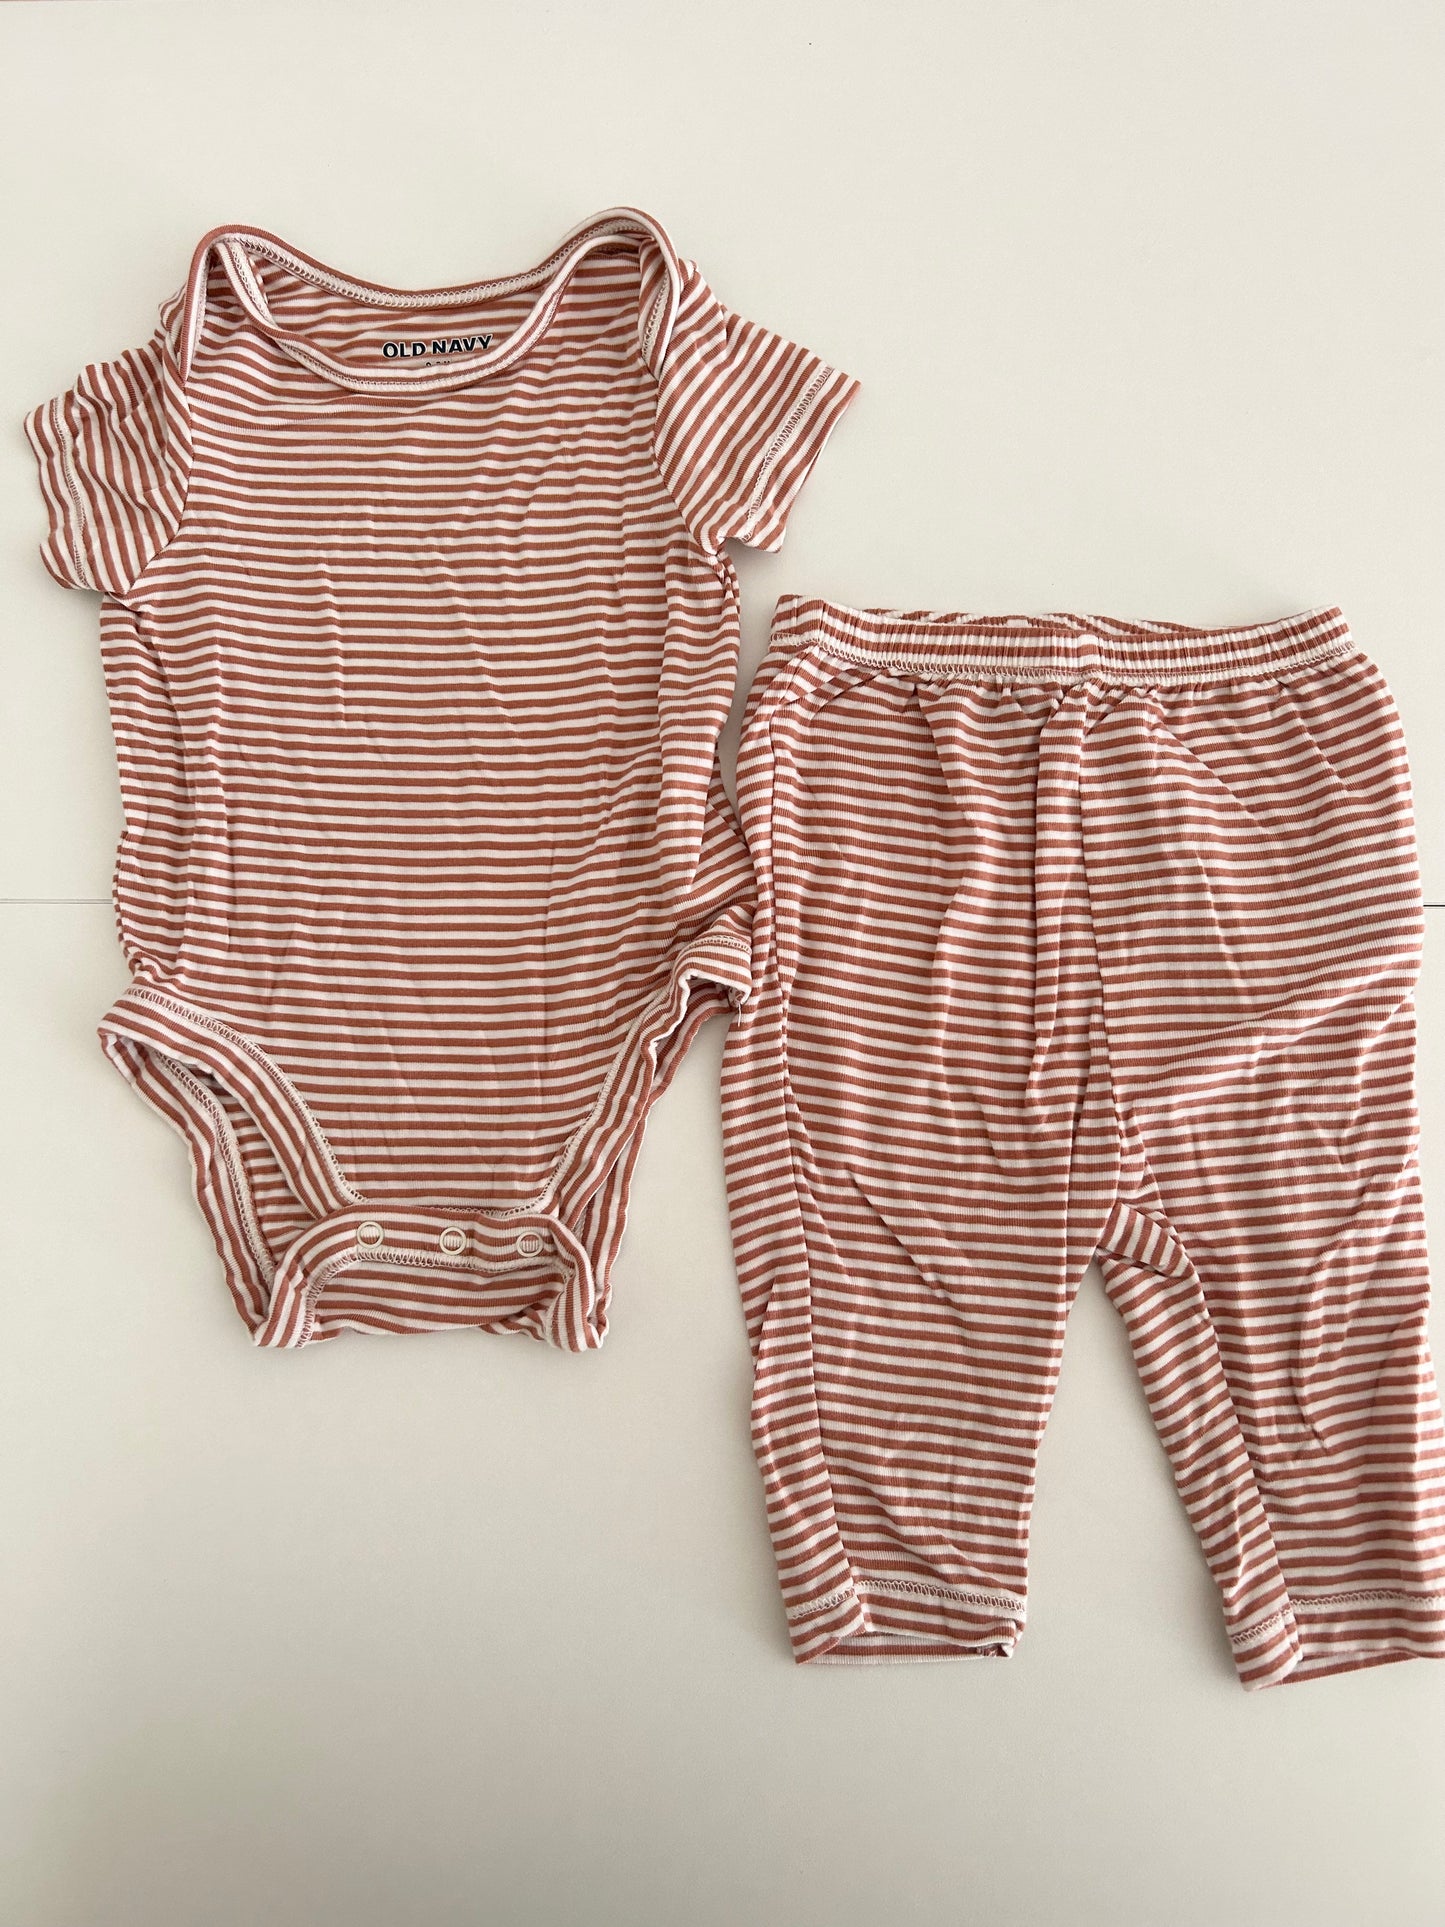 Old Navy | Outfit | Gender Neutral | Off White & Orange | 0-3 months